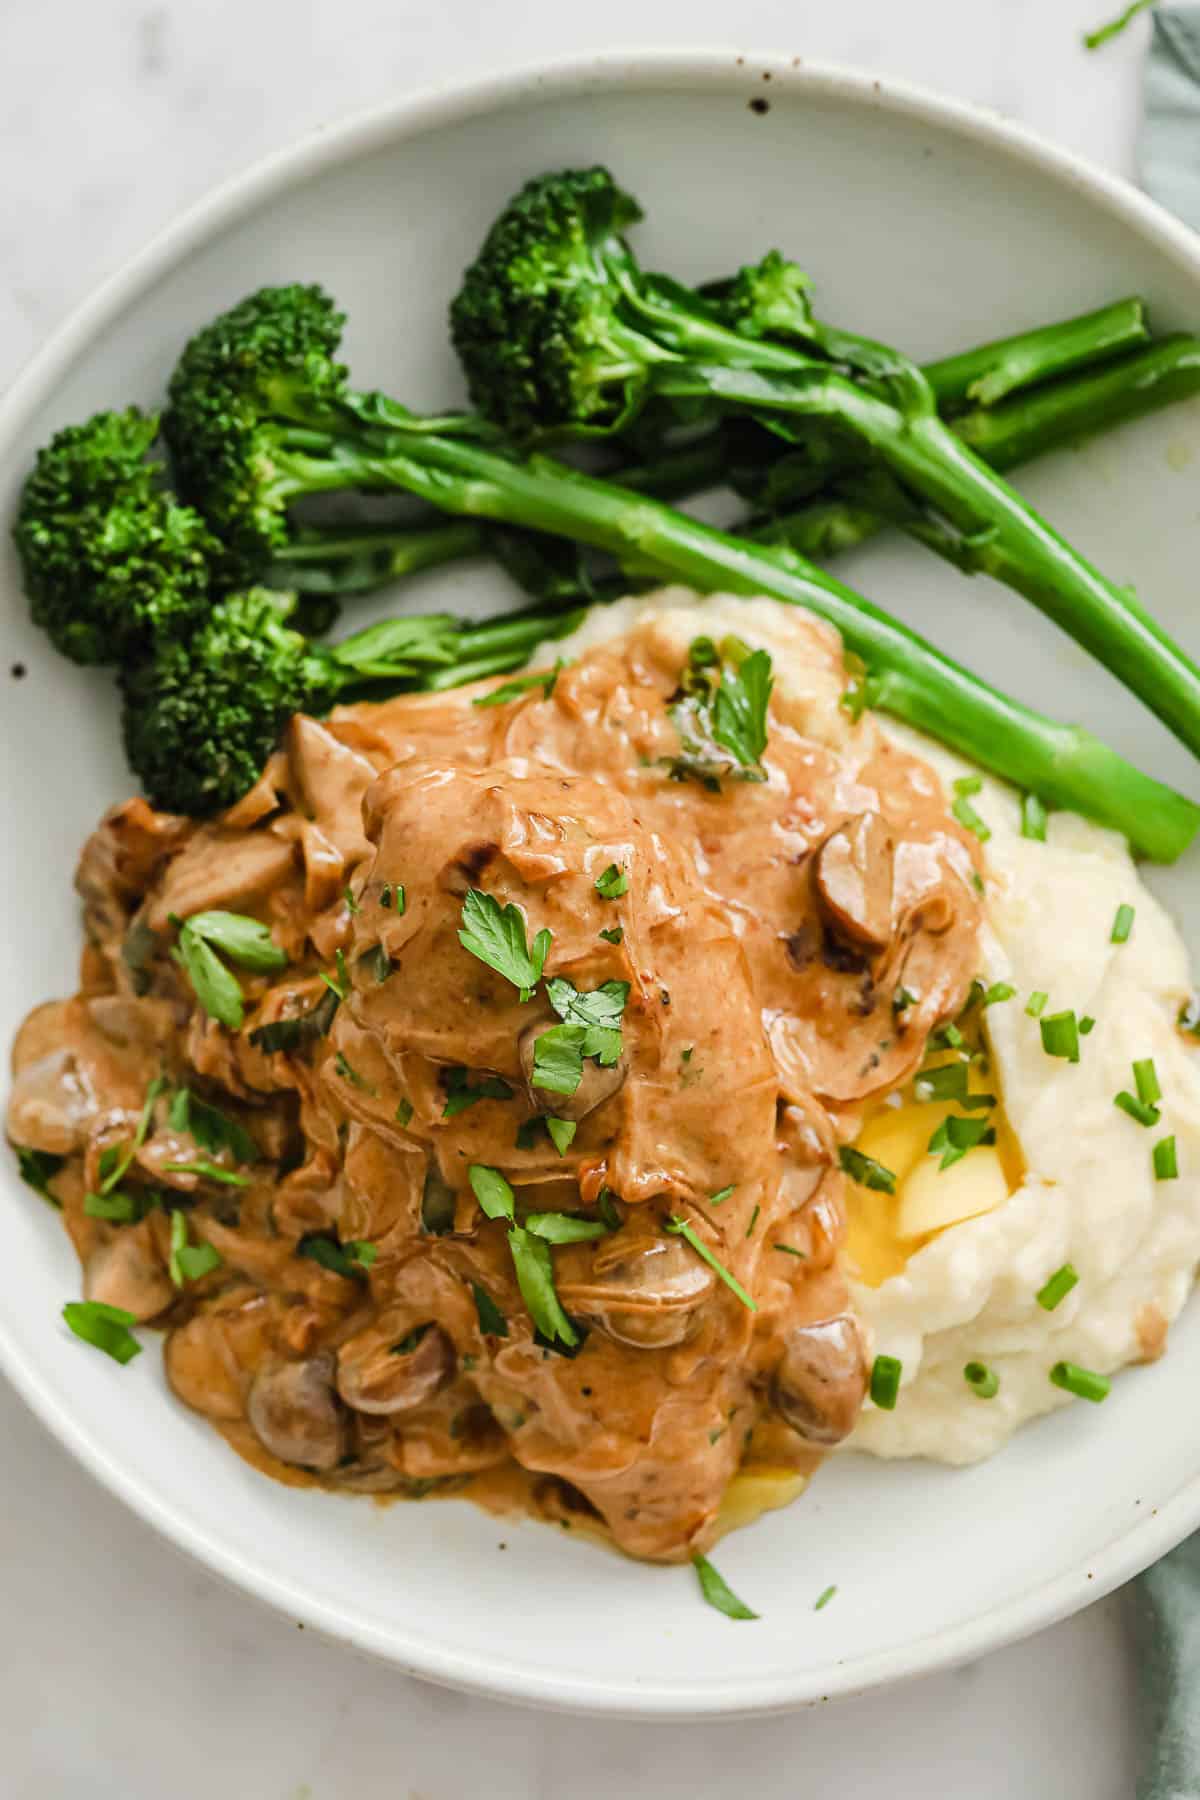 creamy chicken with mushrooms and onions, plated with cauliflower mash and broccoli